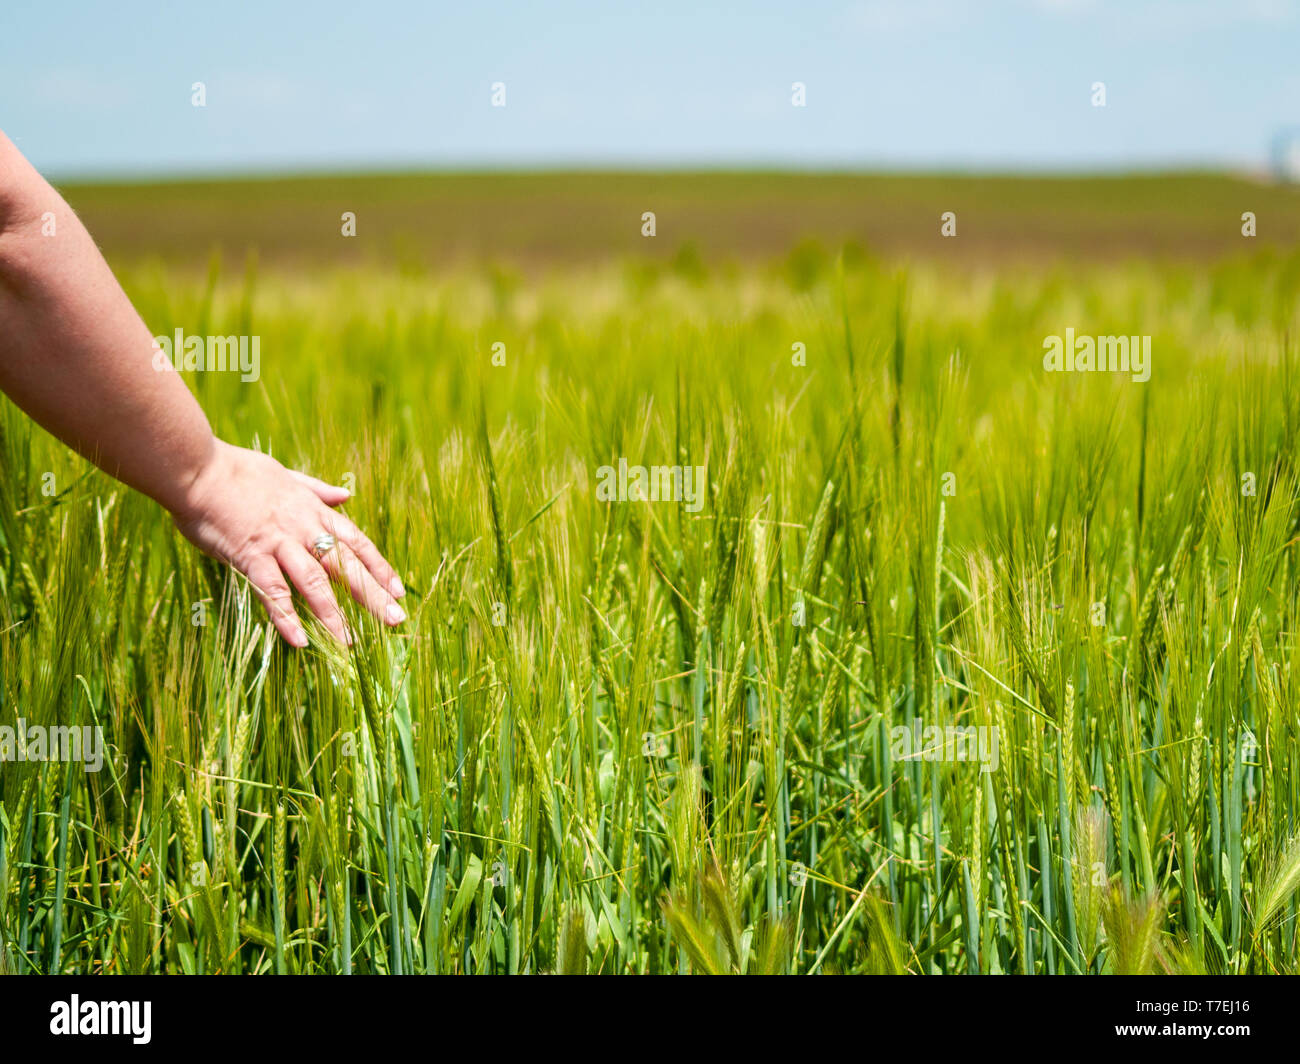 Unrecognizable person playing with his hand the plants in a crop field in spring barley Stock Photo